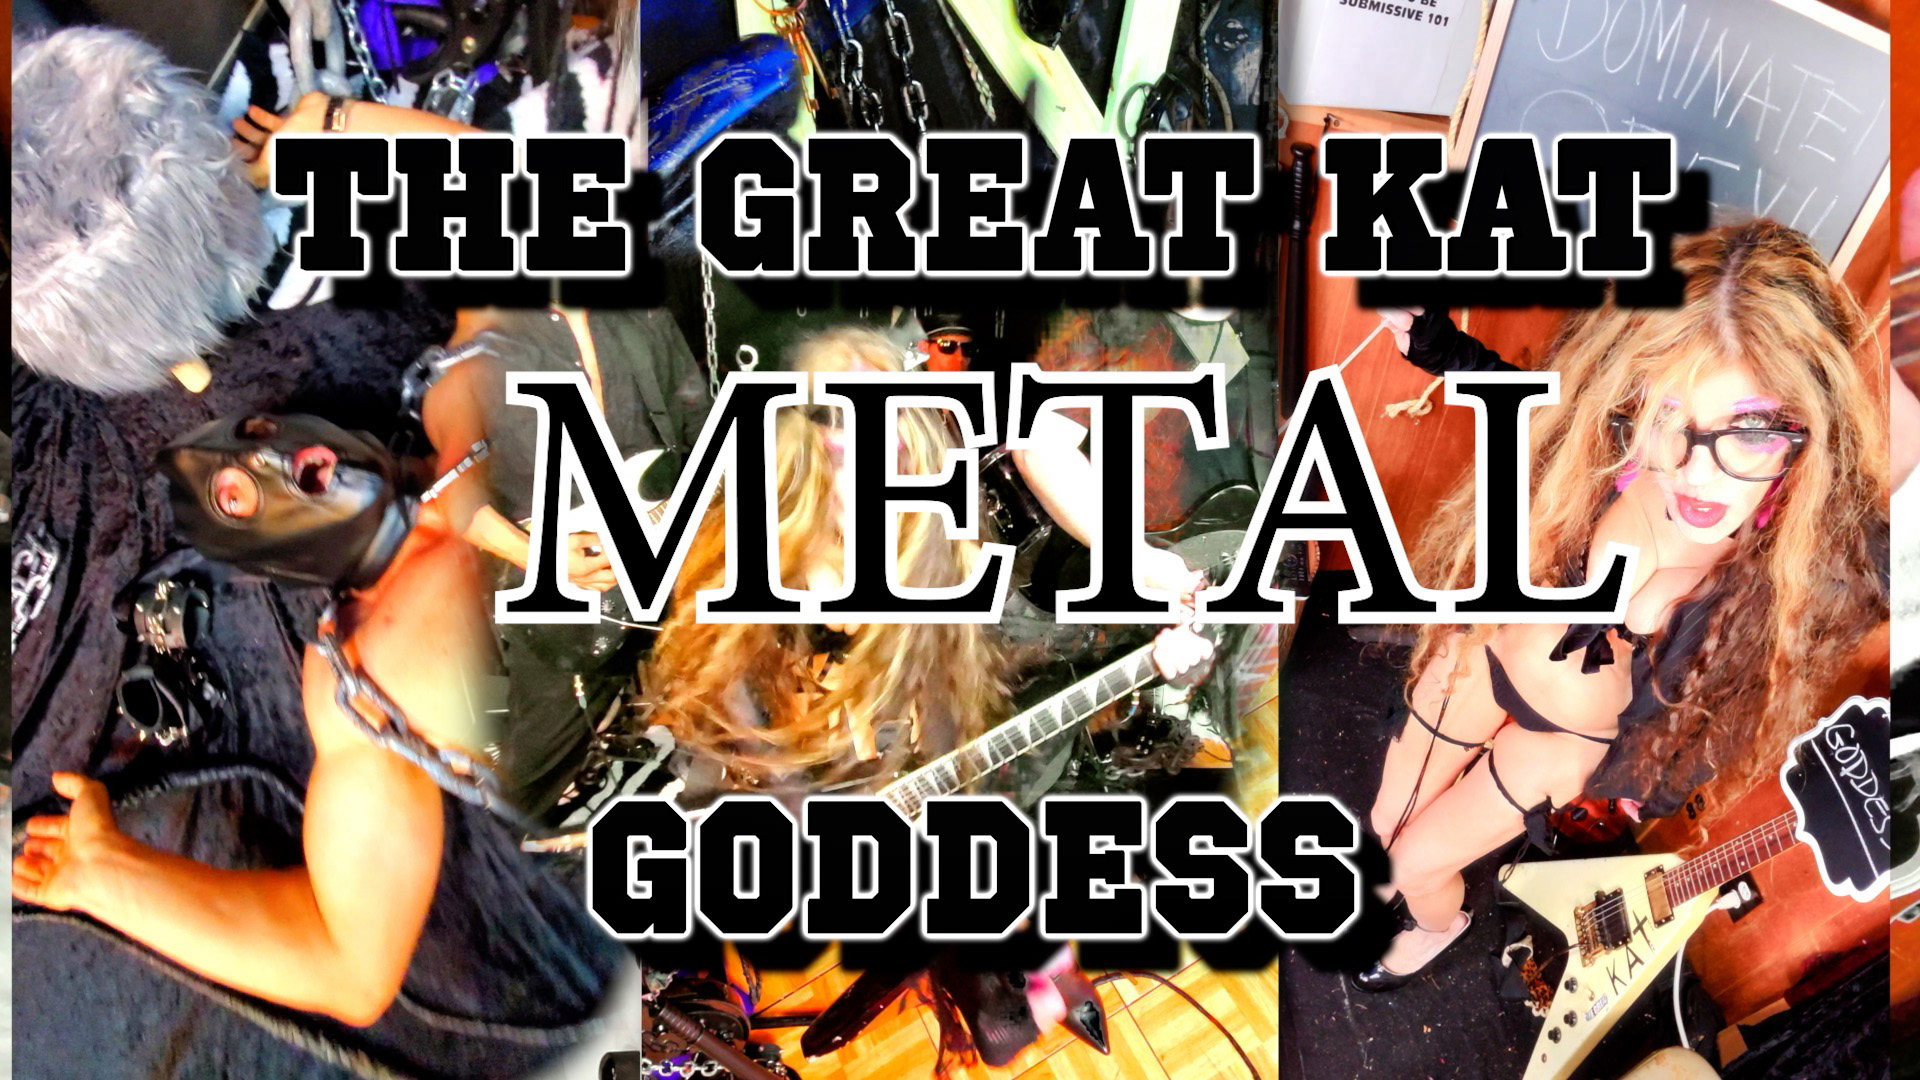 NEW "METAL GODDESS  TWILIGHT OF THE GODS  THE GREAT KAT VALKYRIE Music Video & Single Featuring WAGNER, BEETHOVEN, CHOPIN and GODDESS PREMIERES! The Musical Gods (and Goddess) Unite! 